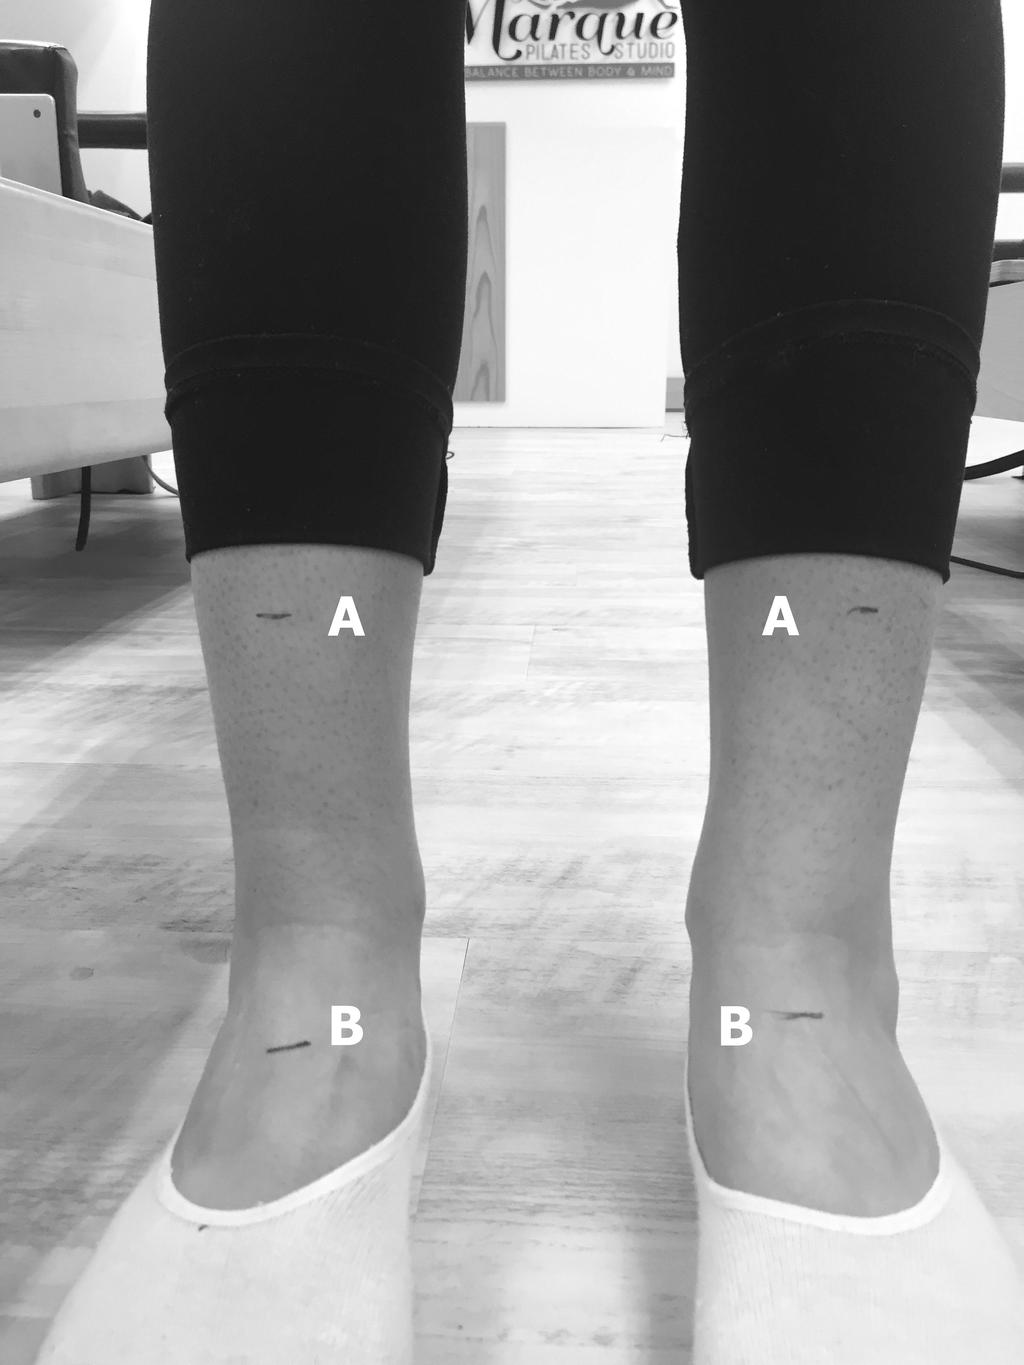 The results after doing Program 2 once can be Hamstring Flexibility Comparison seen in Image 4 below. The hamstring flexibility measurements were conducted the same way as mentioned in Image 3.